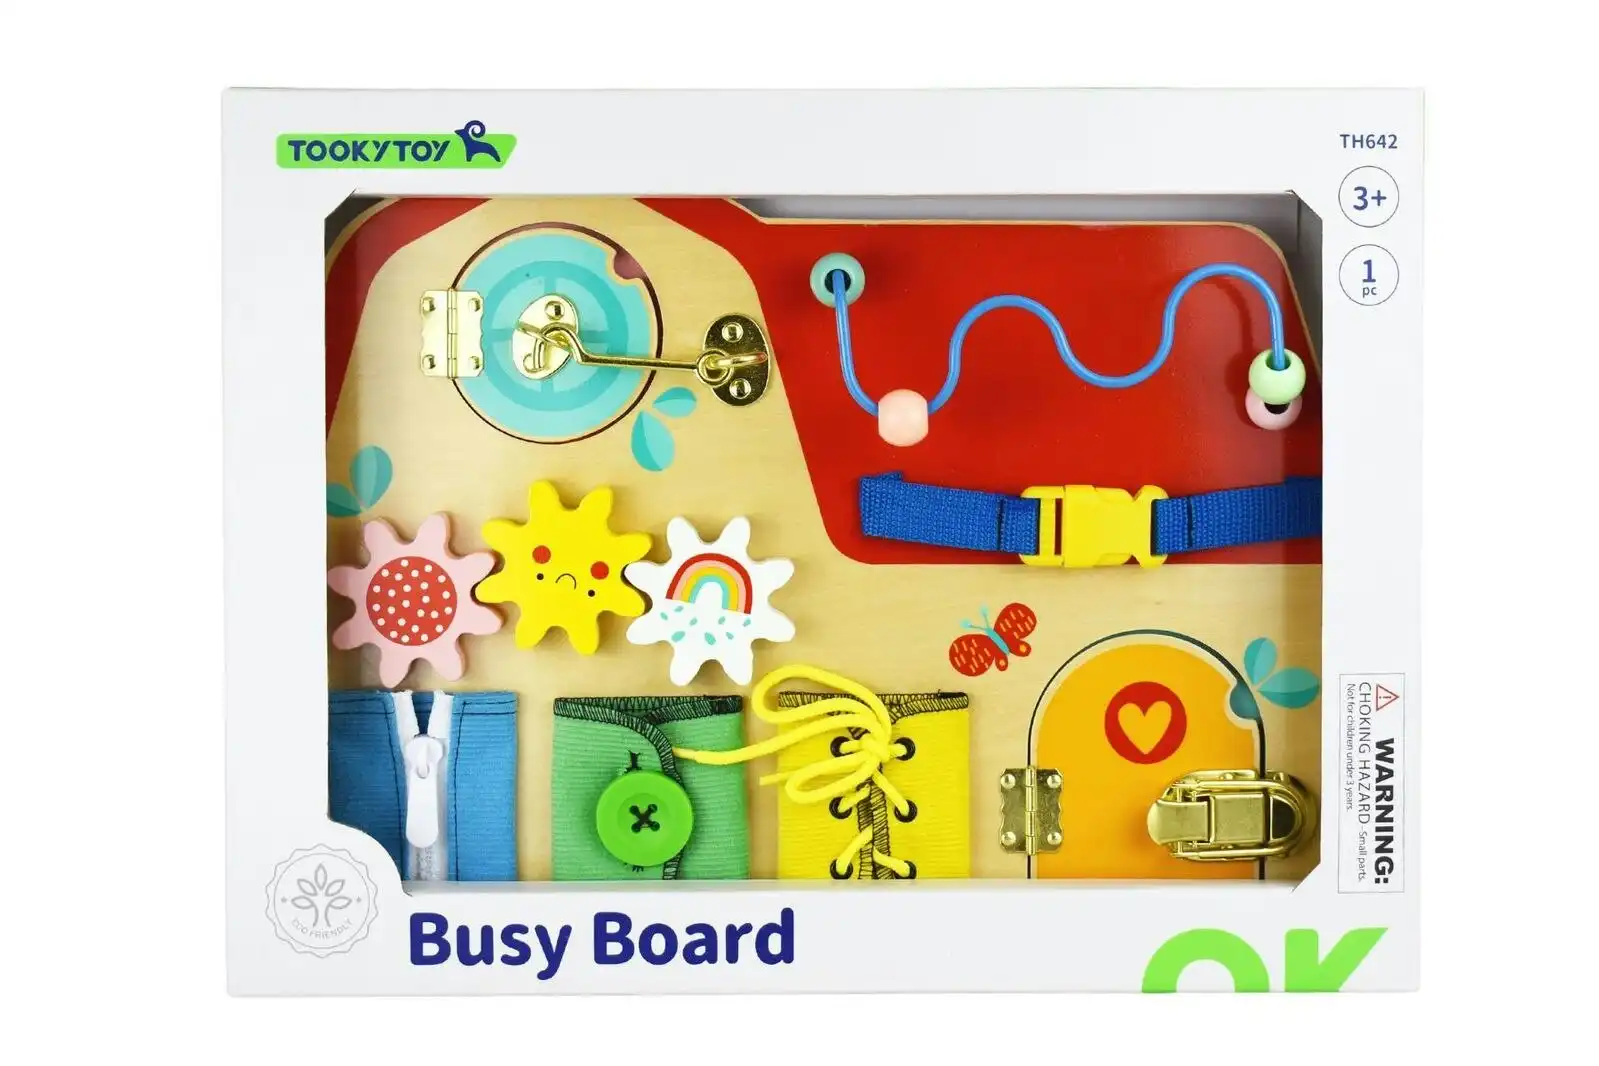 Tooky Toy Busy Board Educational Kids Fun Interactive Activity Game Play 3+